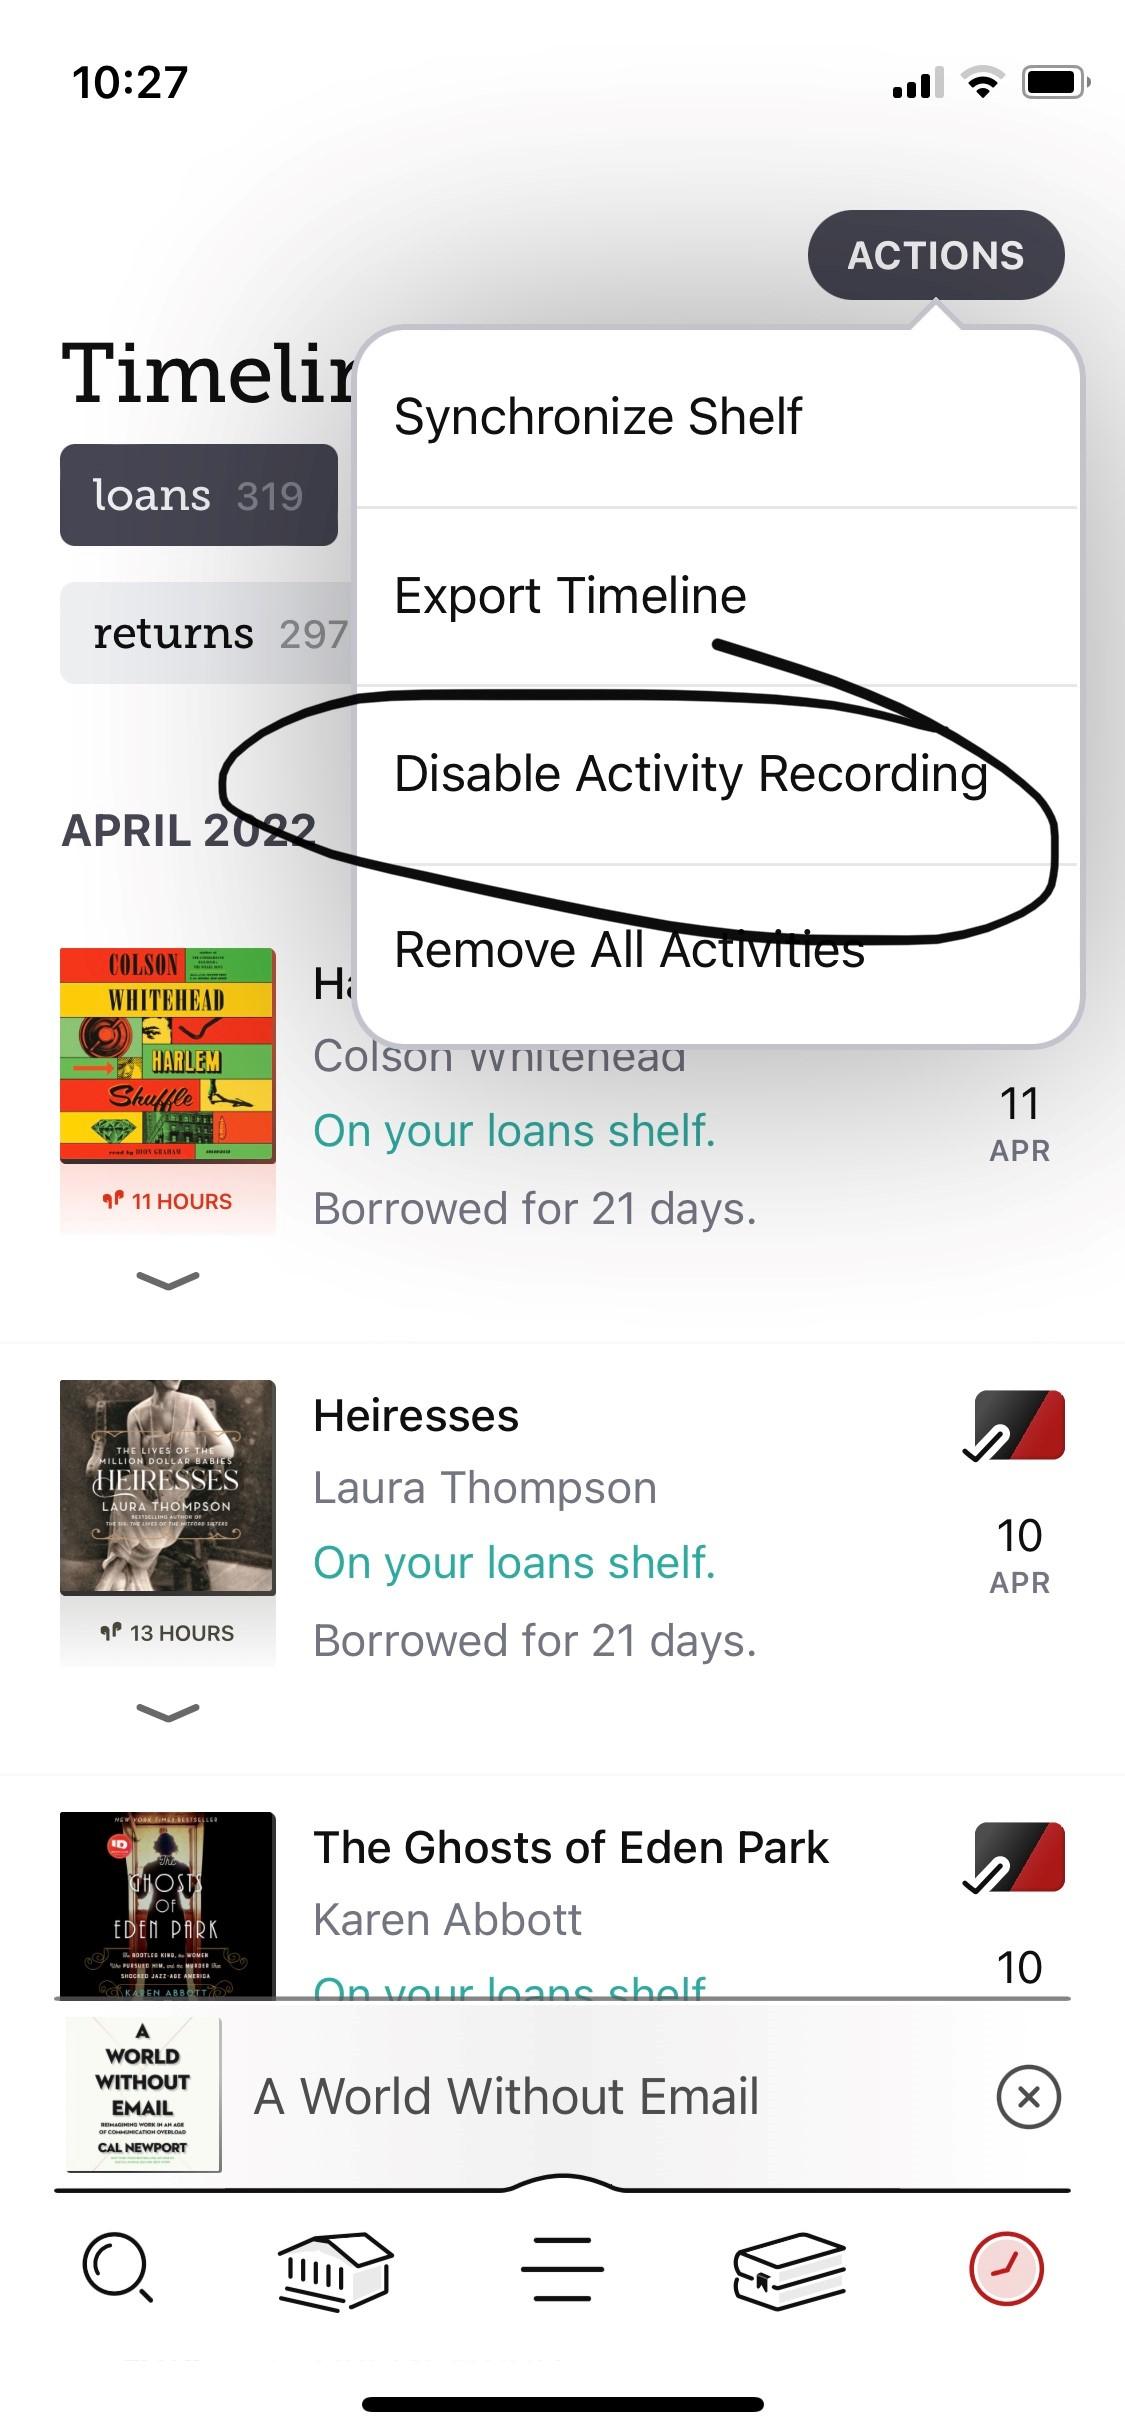 Click on Disable Recording Activity to opt out of the timeline in Libby.